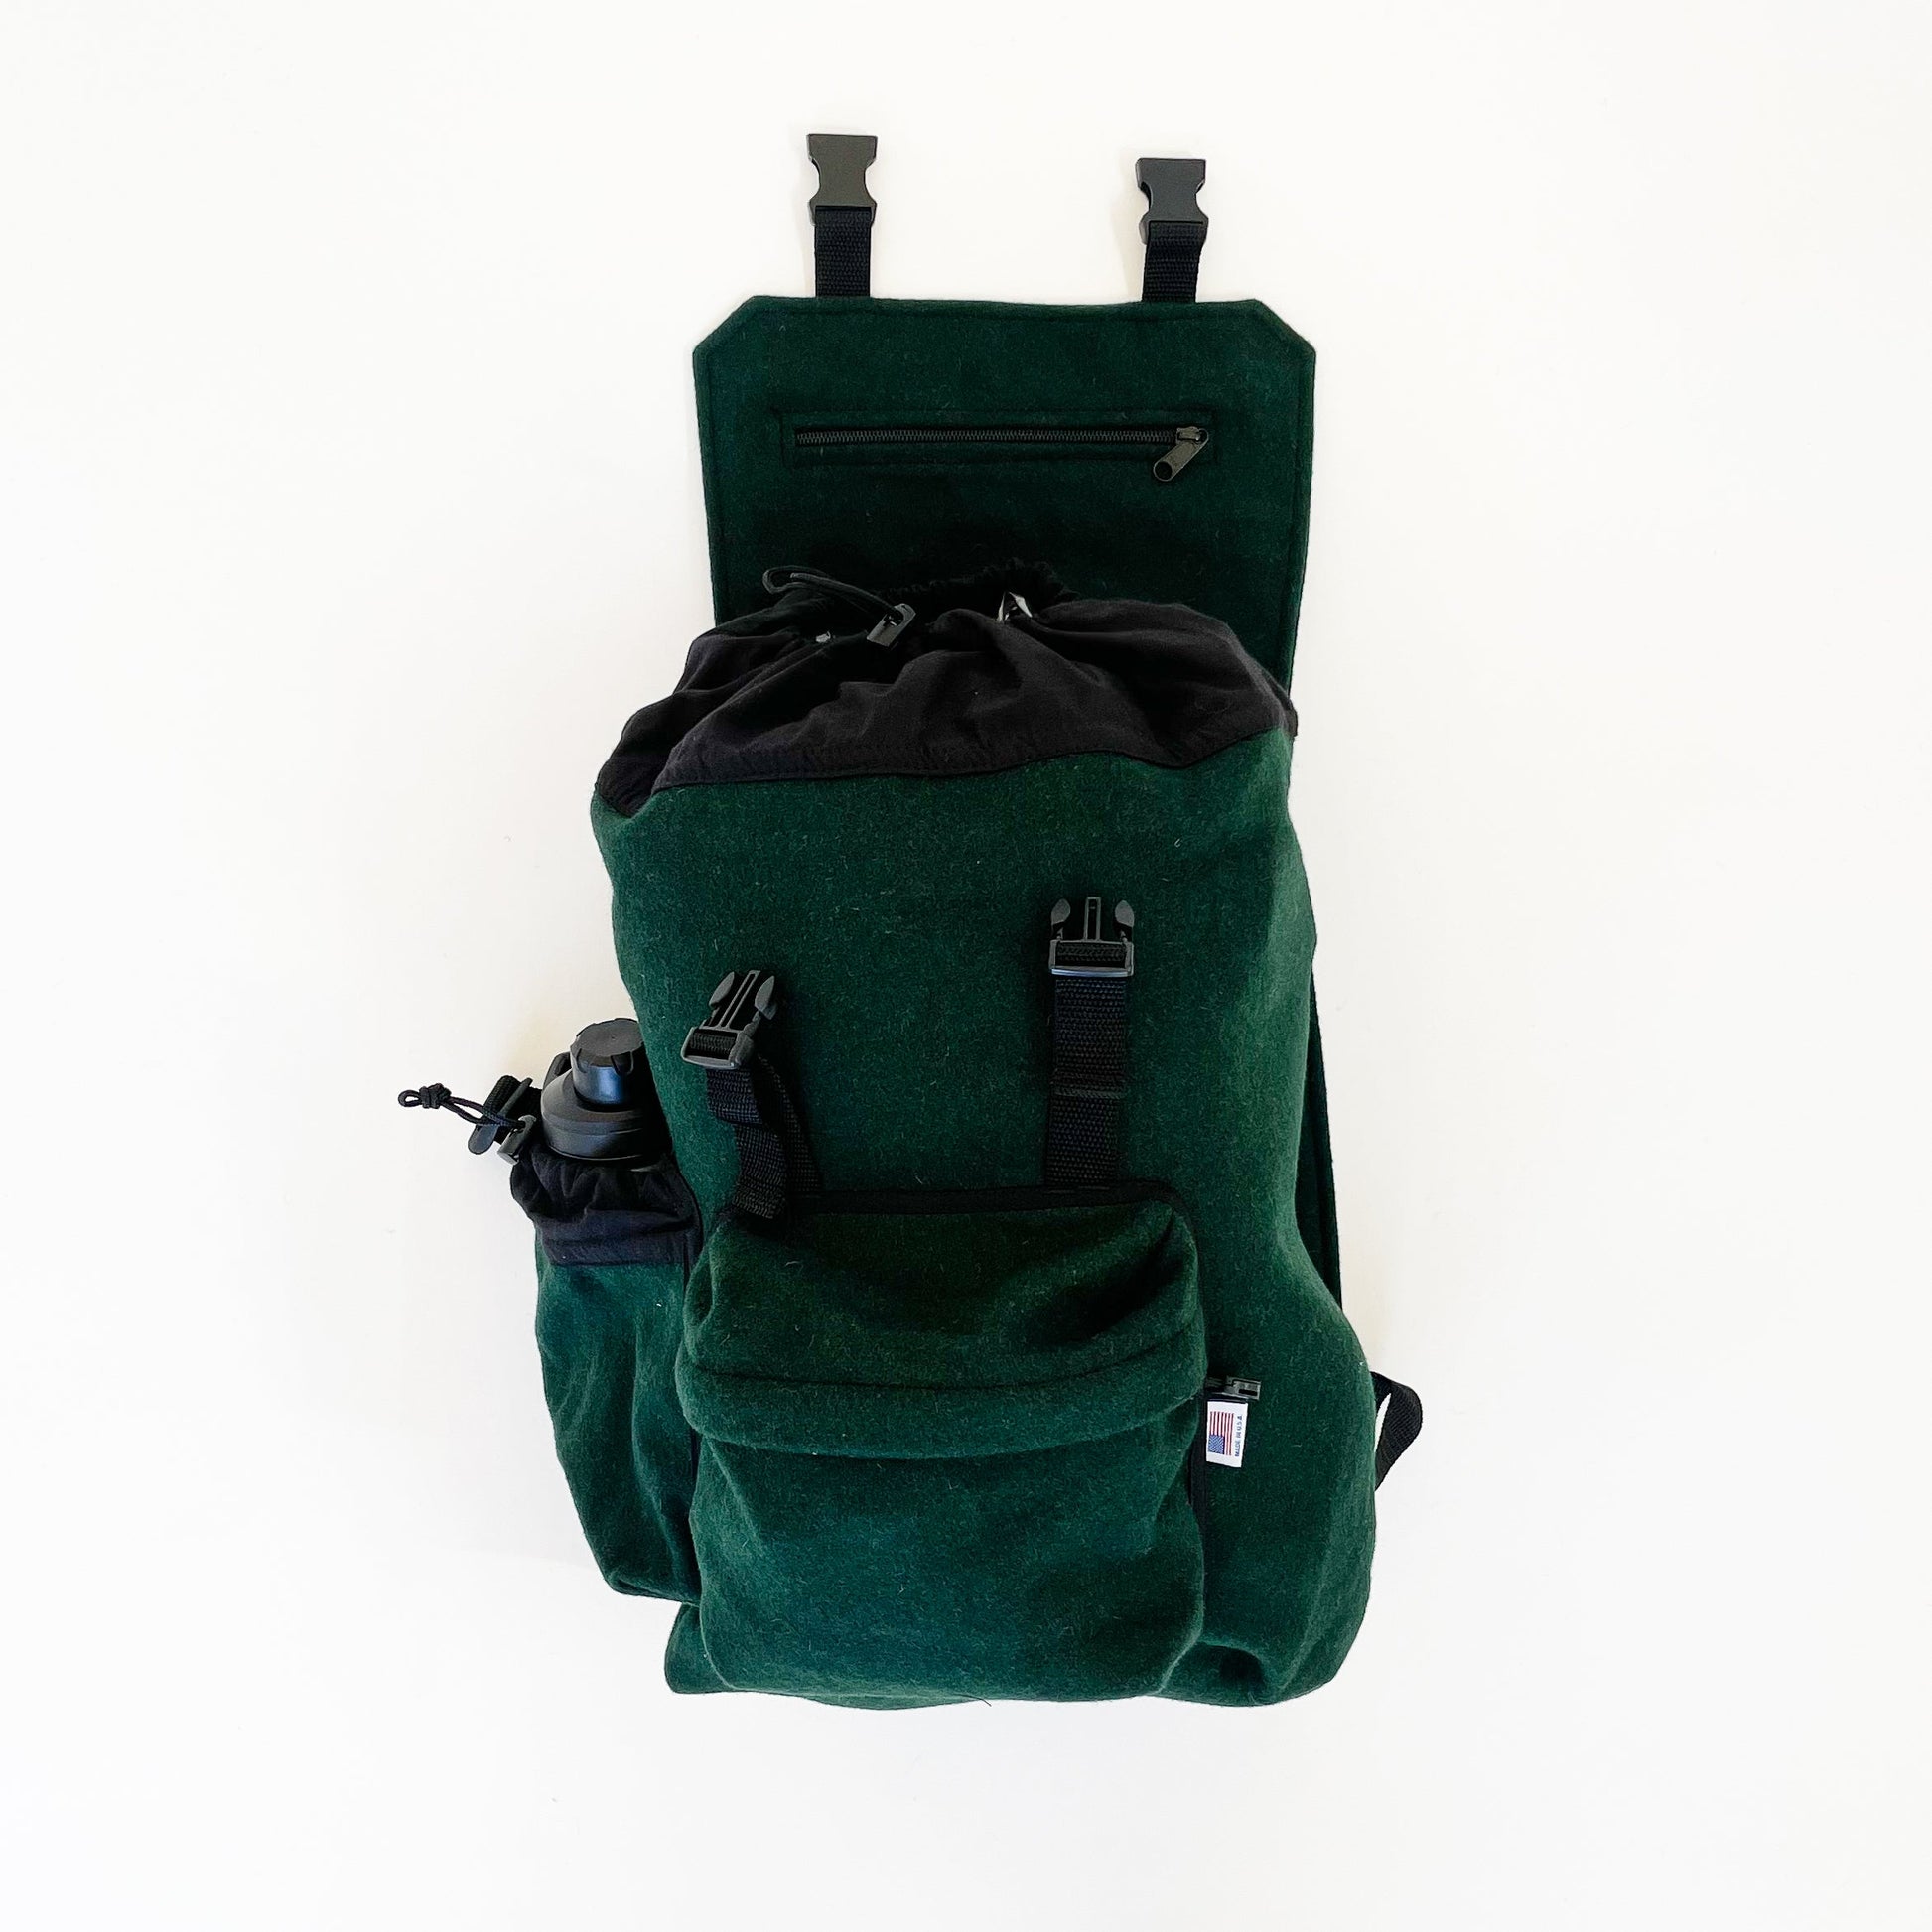 Wool back pack - Spruce green with water bottle shown in side pocket and top flap open